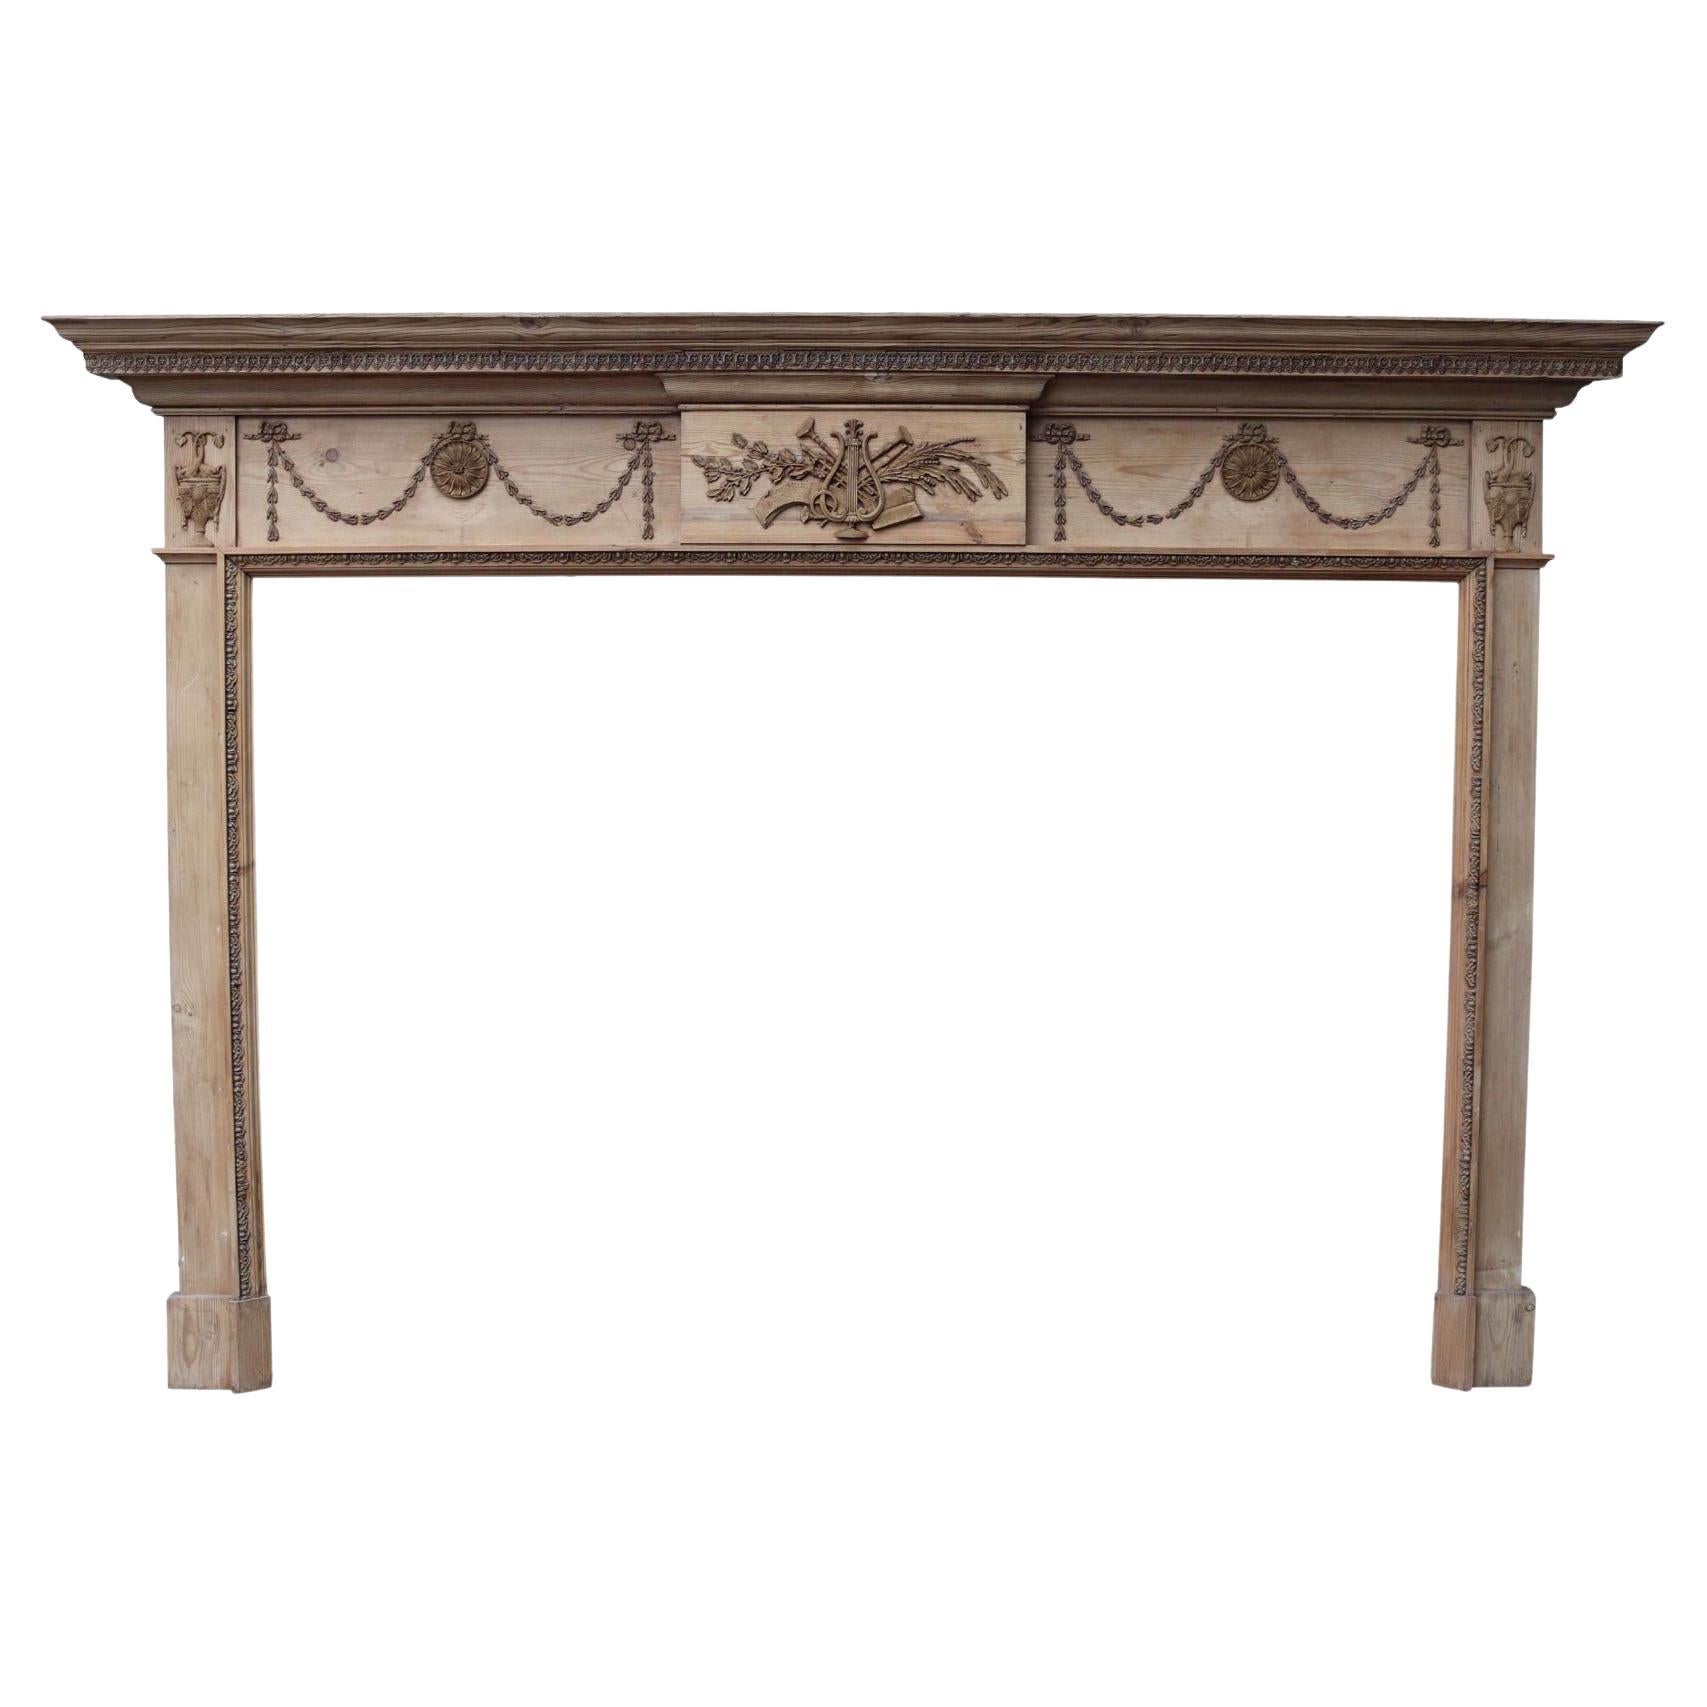 George III Pine and Gesso Fire Mantel